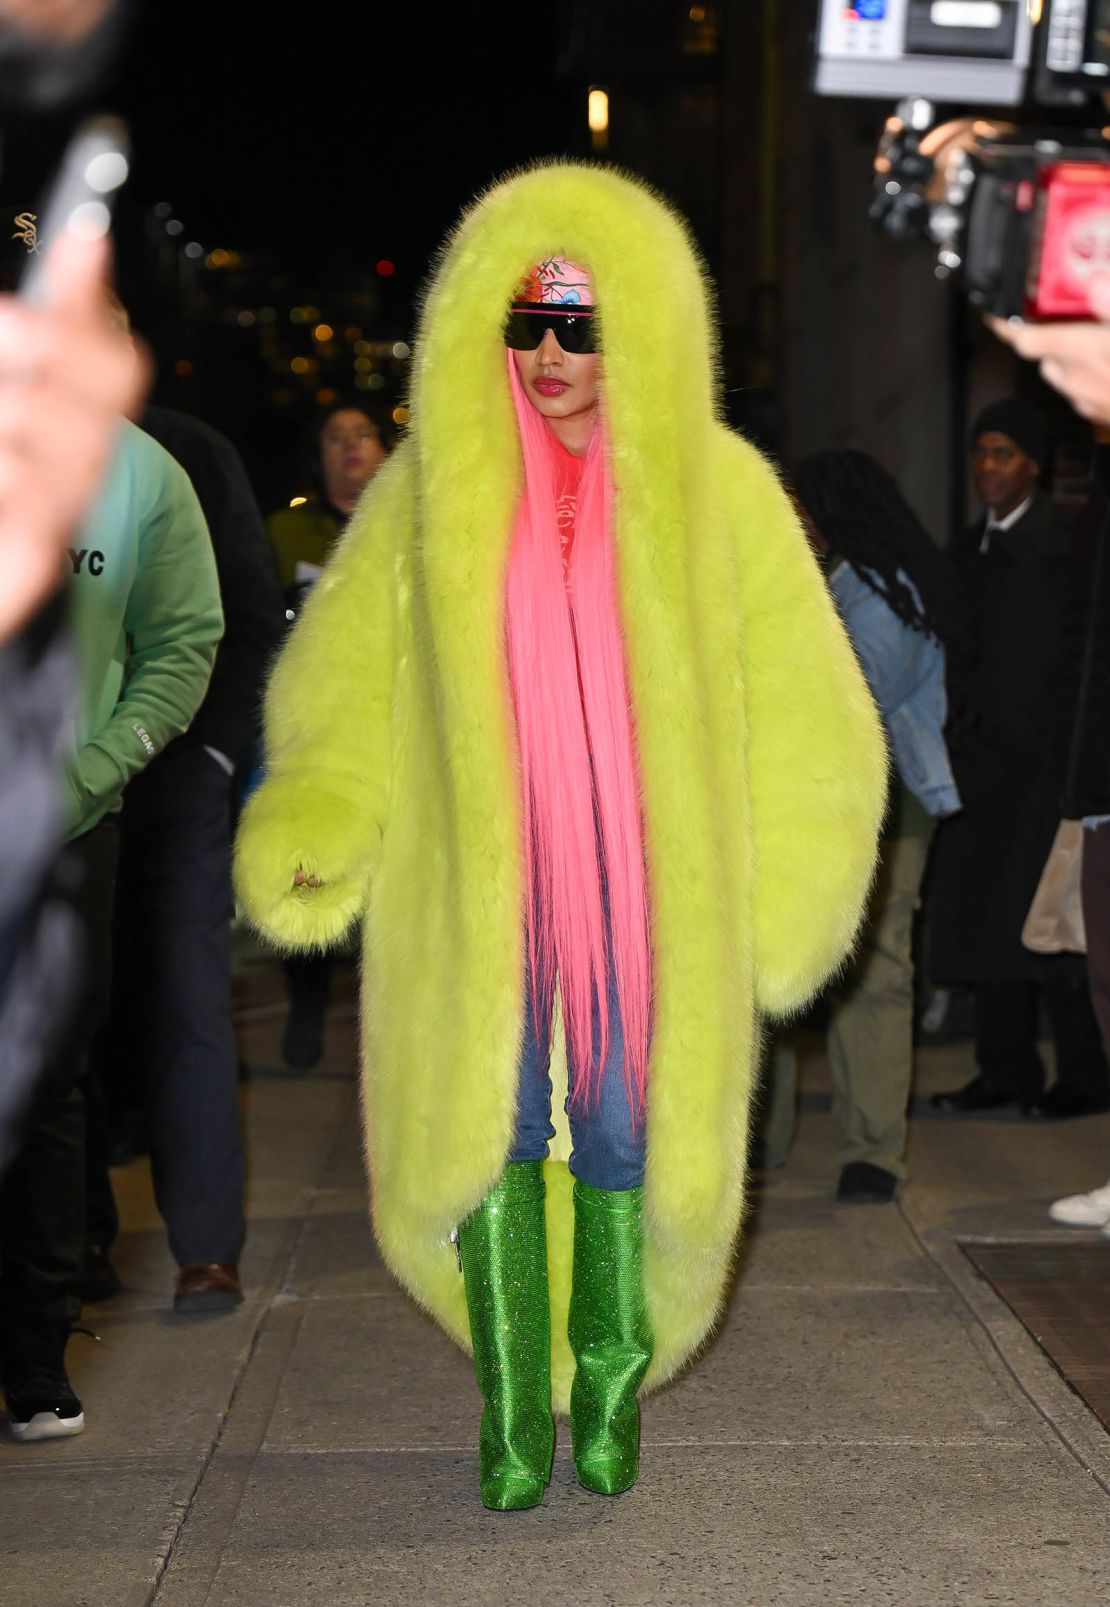 NEW YORK, NEW YORK - DECEMBER 11:  Nicki Minaj leaves 'The Late Show With Stephen Colbert' at the Ed Sullivan Theater on December 11, 2023 in New York City. (Photo by James Devaney/GC Images)